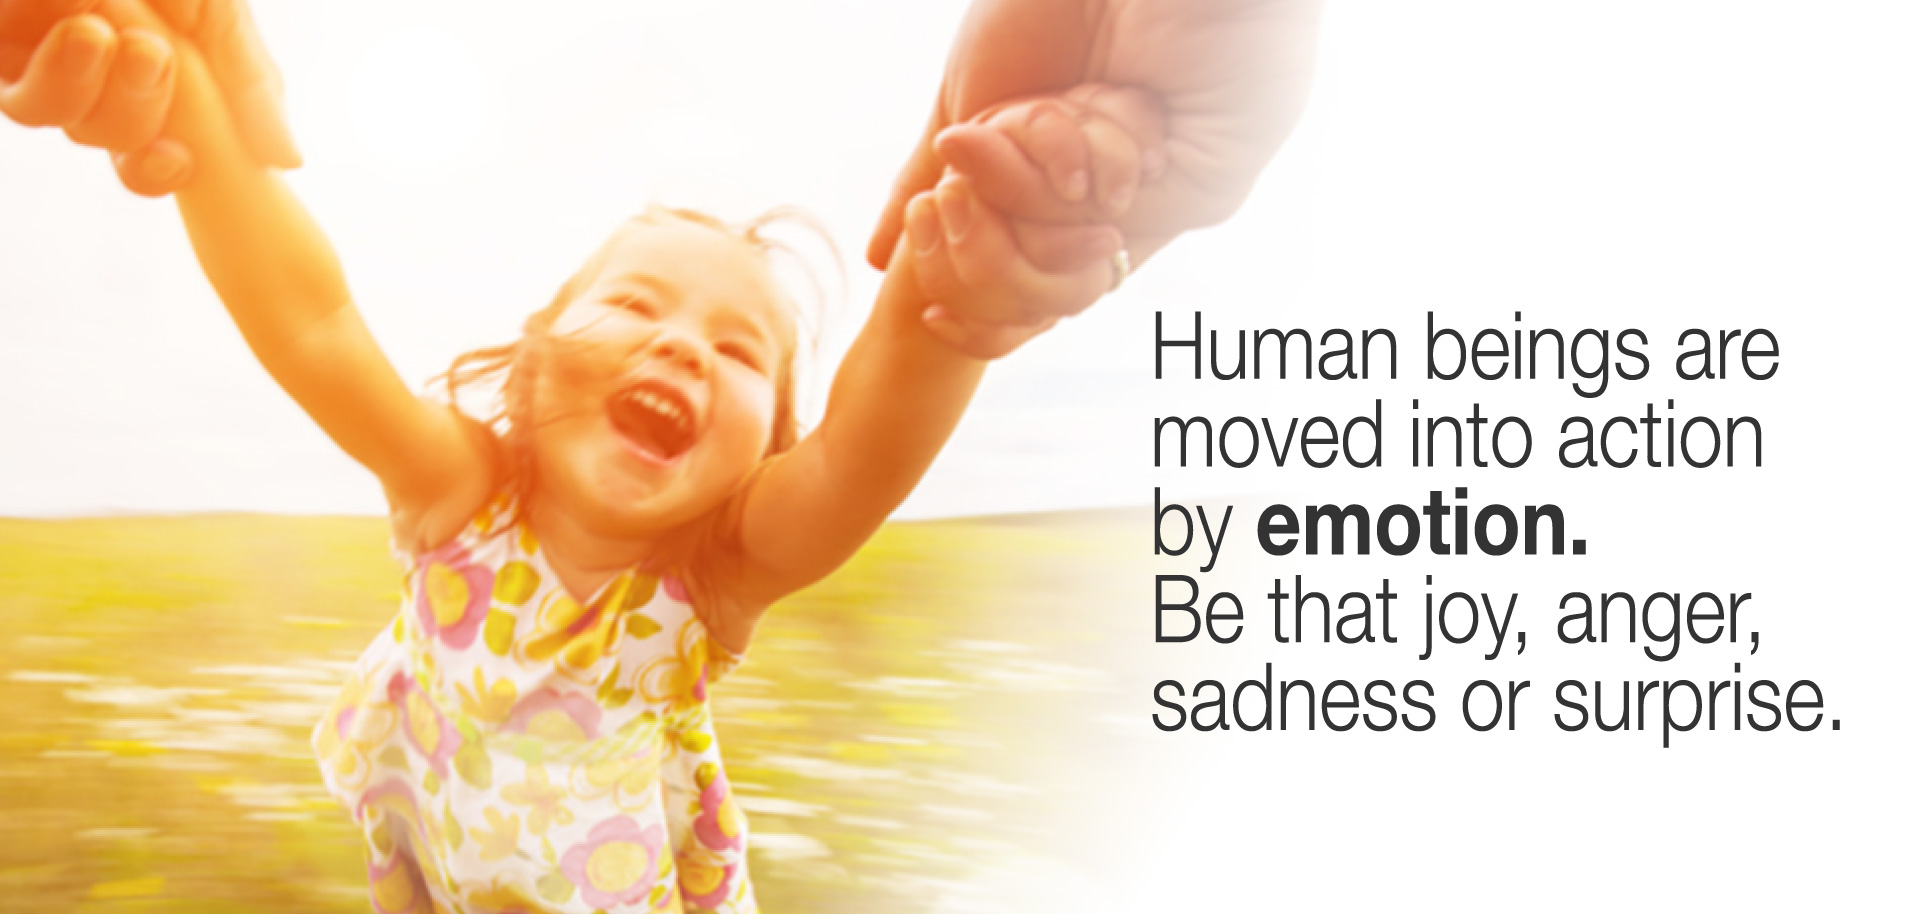 Human beings are moved into action by emotion. Be that joy, anger, sadness or surprise.